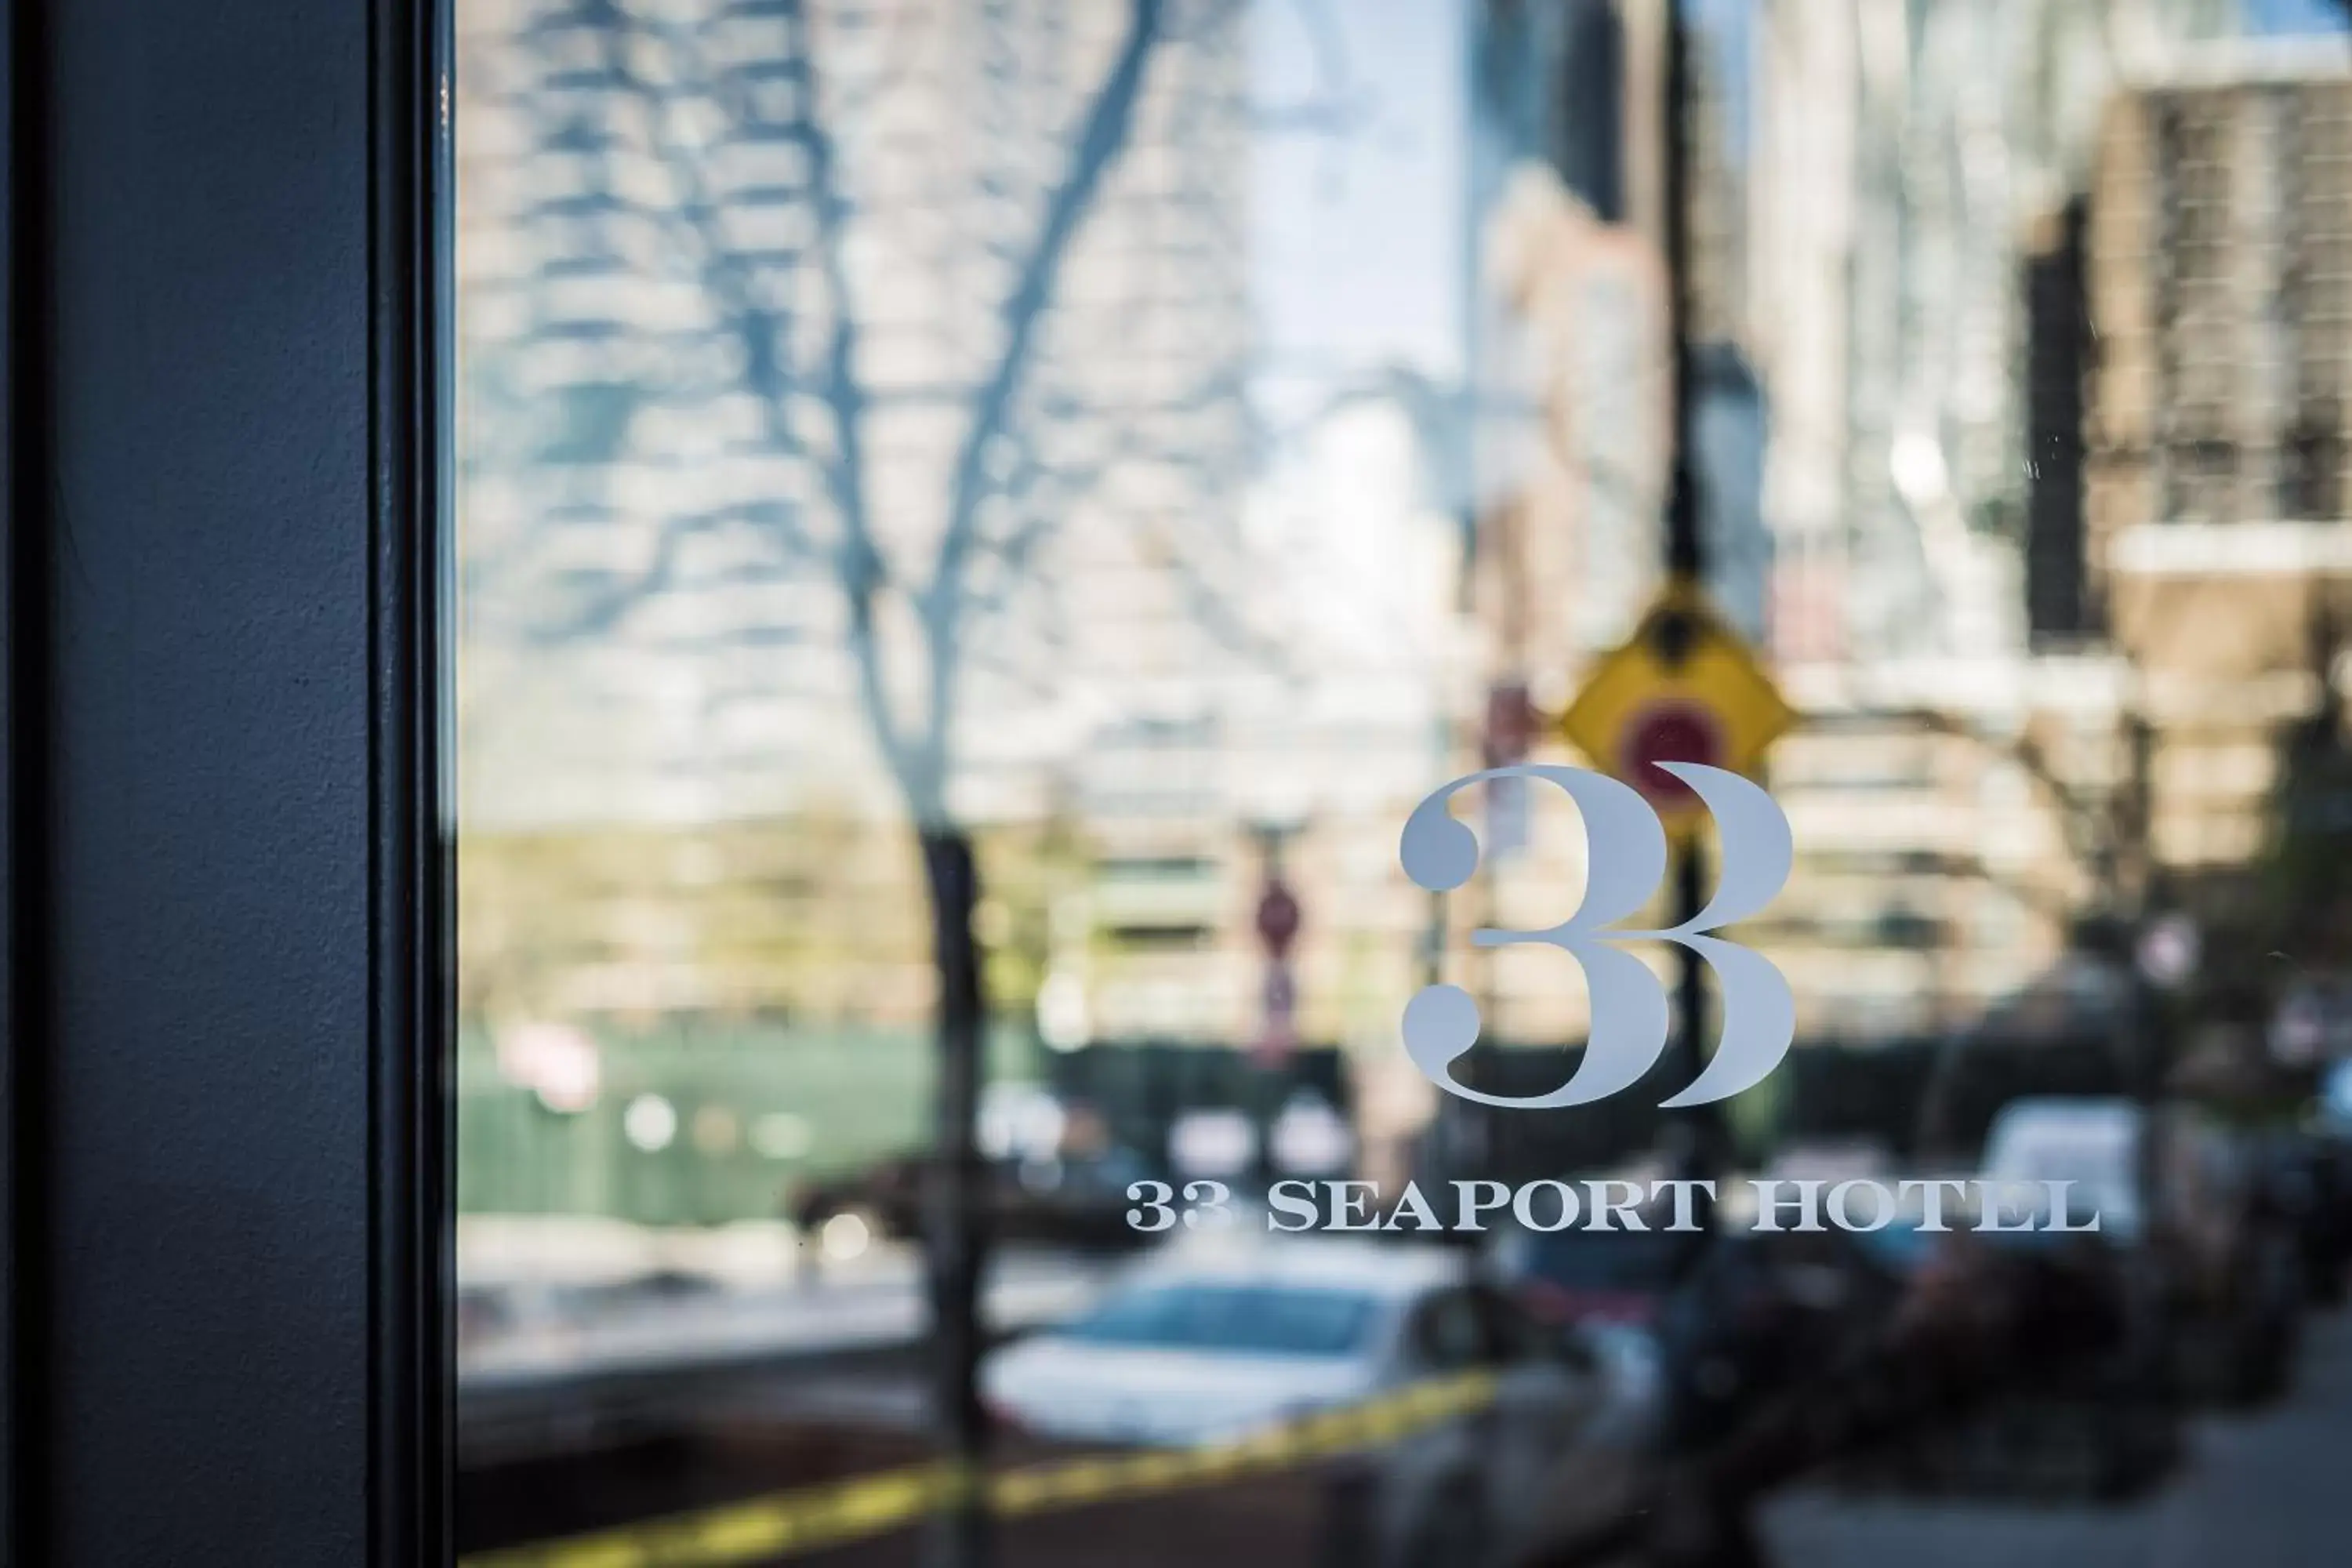 Property building in 33 Seaport Hotel New York